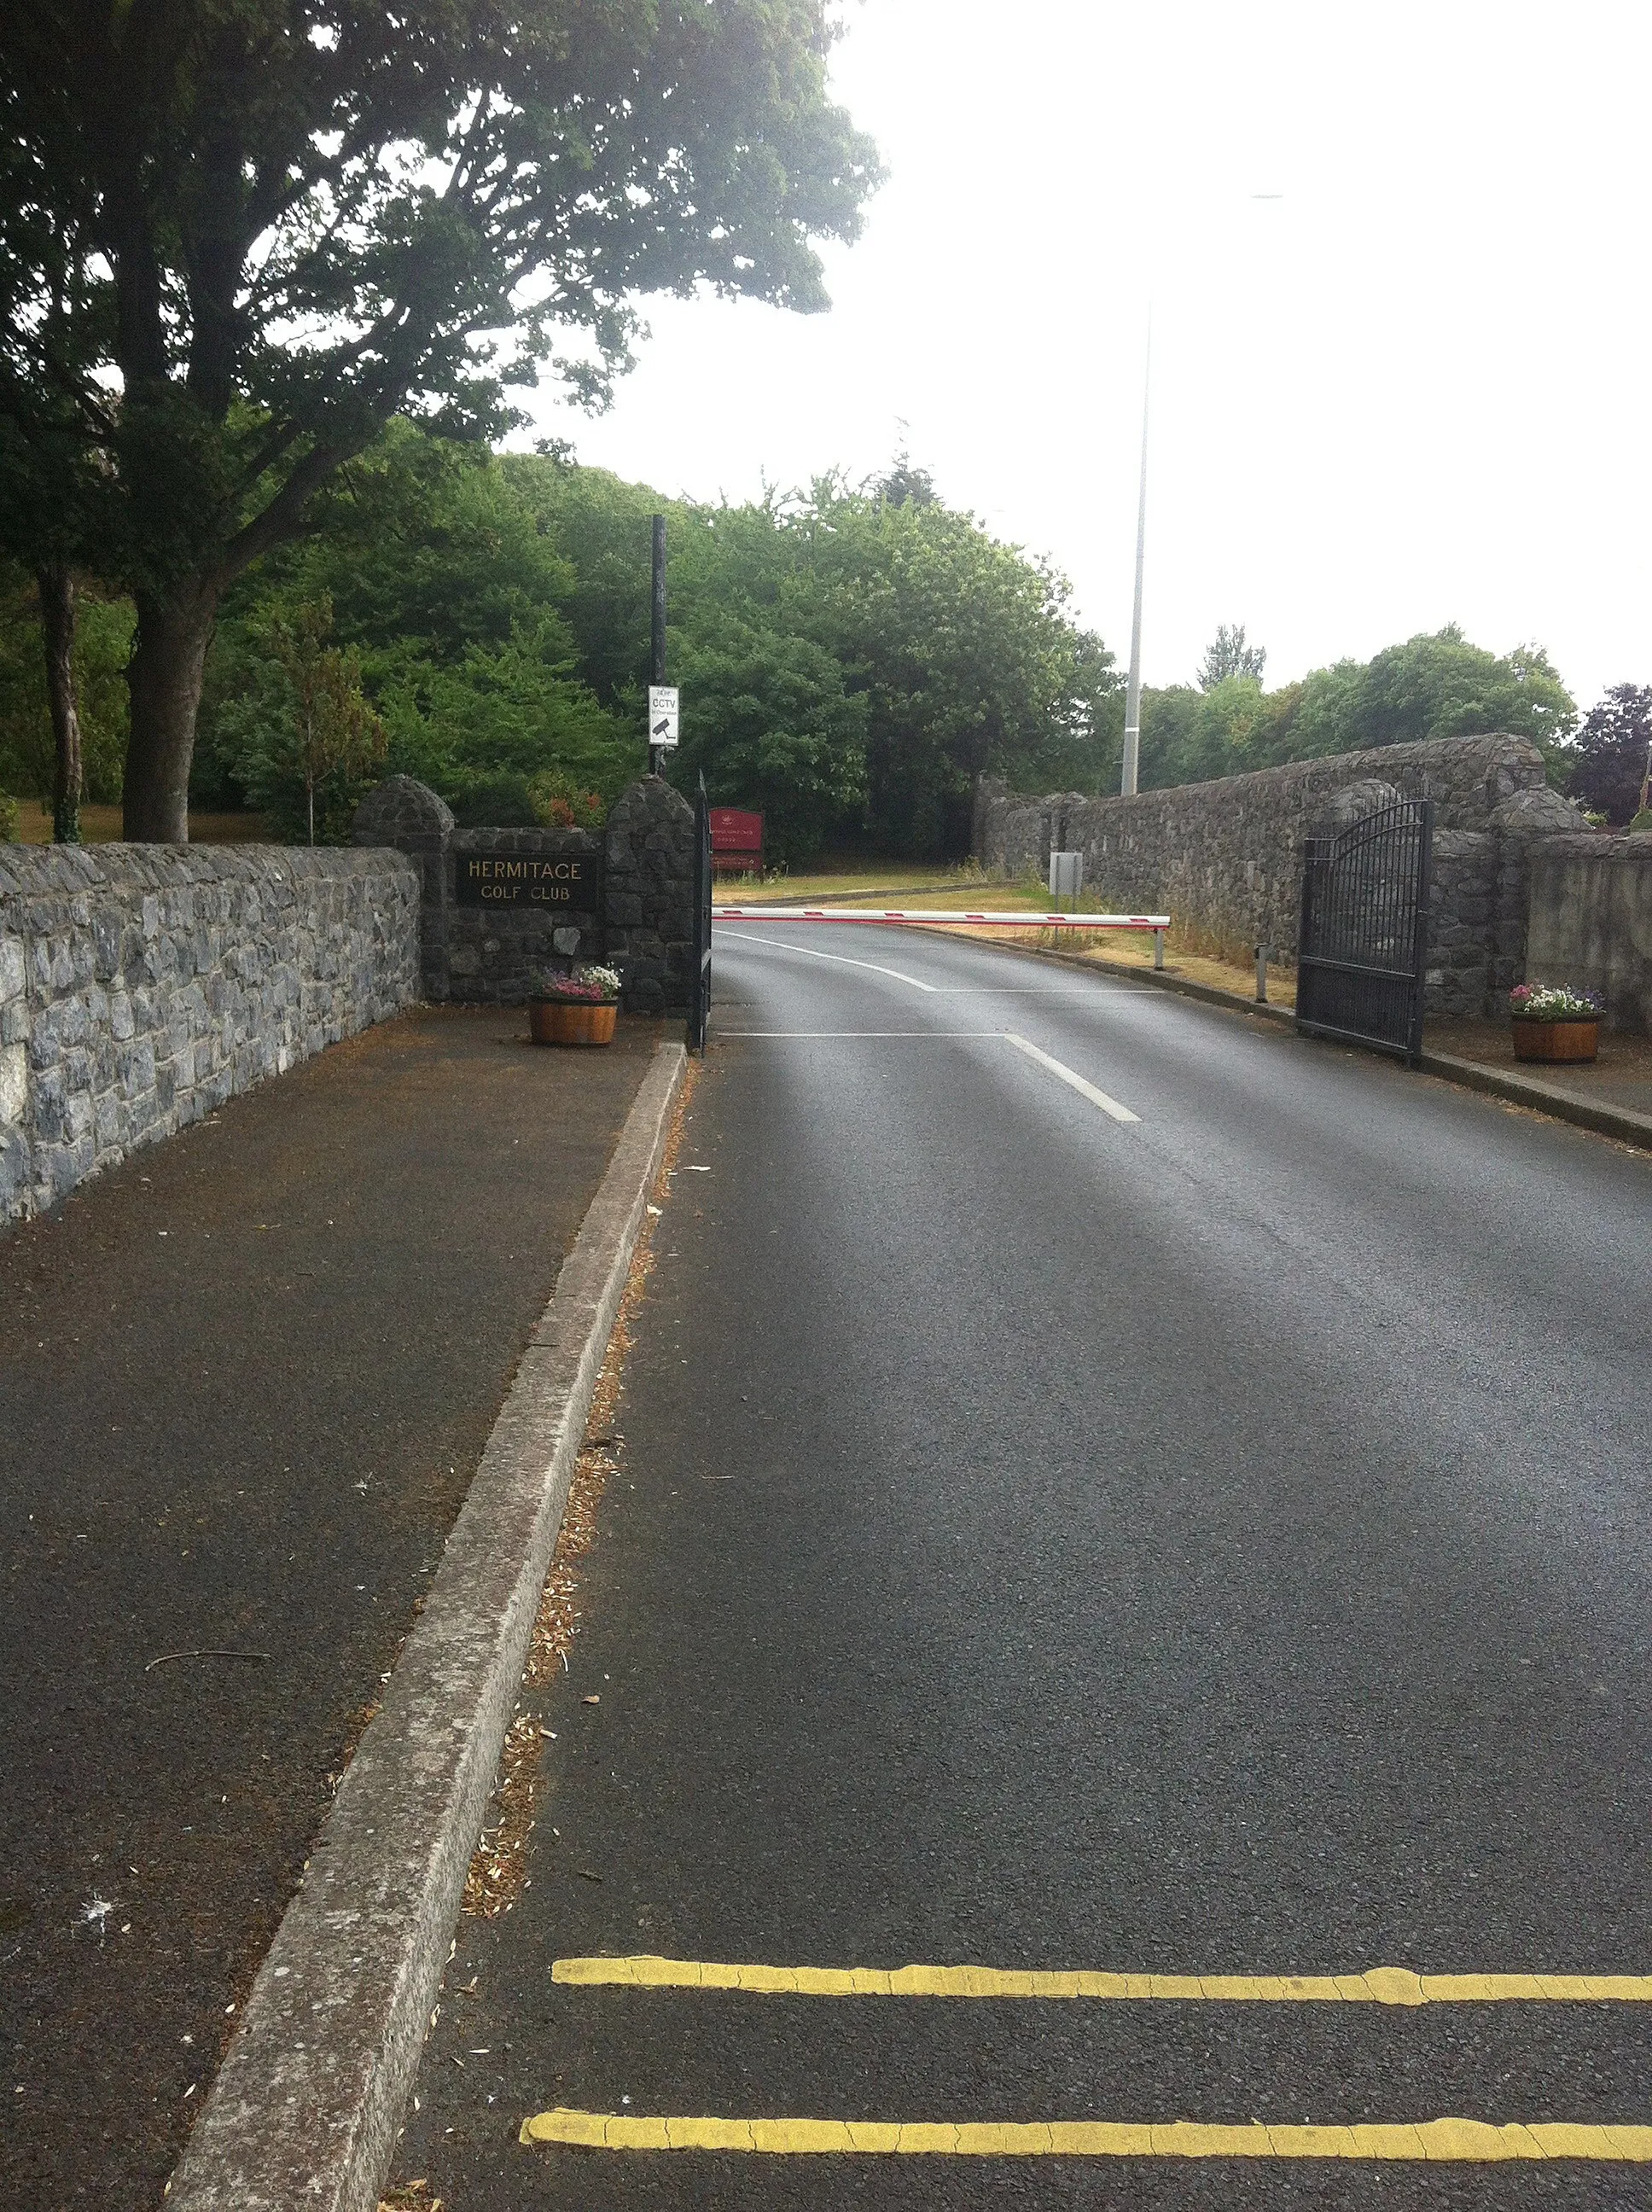 Photo showing: This is a photograph of the entrance to Hermitage Golf Club in Lucan, Co. Dublin